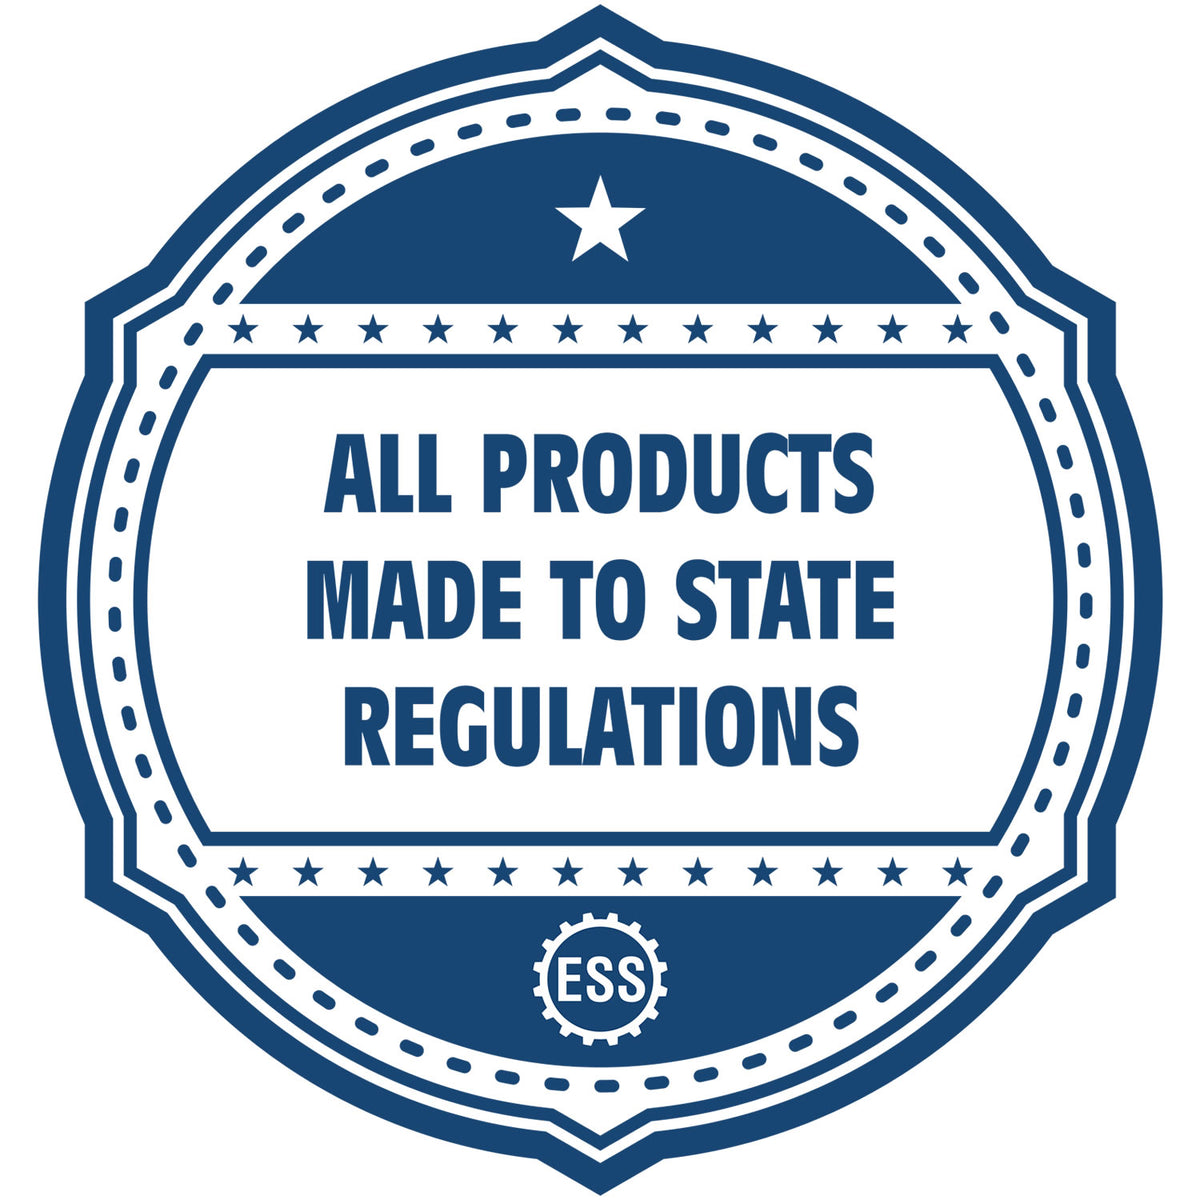 A blue icon or badge for the Slim Pre-Inked Montana Professional Geologist Seal Stamp showing that this product is made in compliance with state regulations.